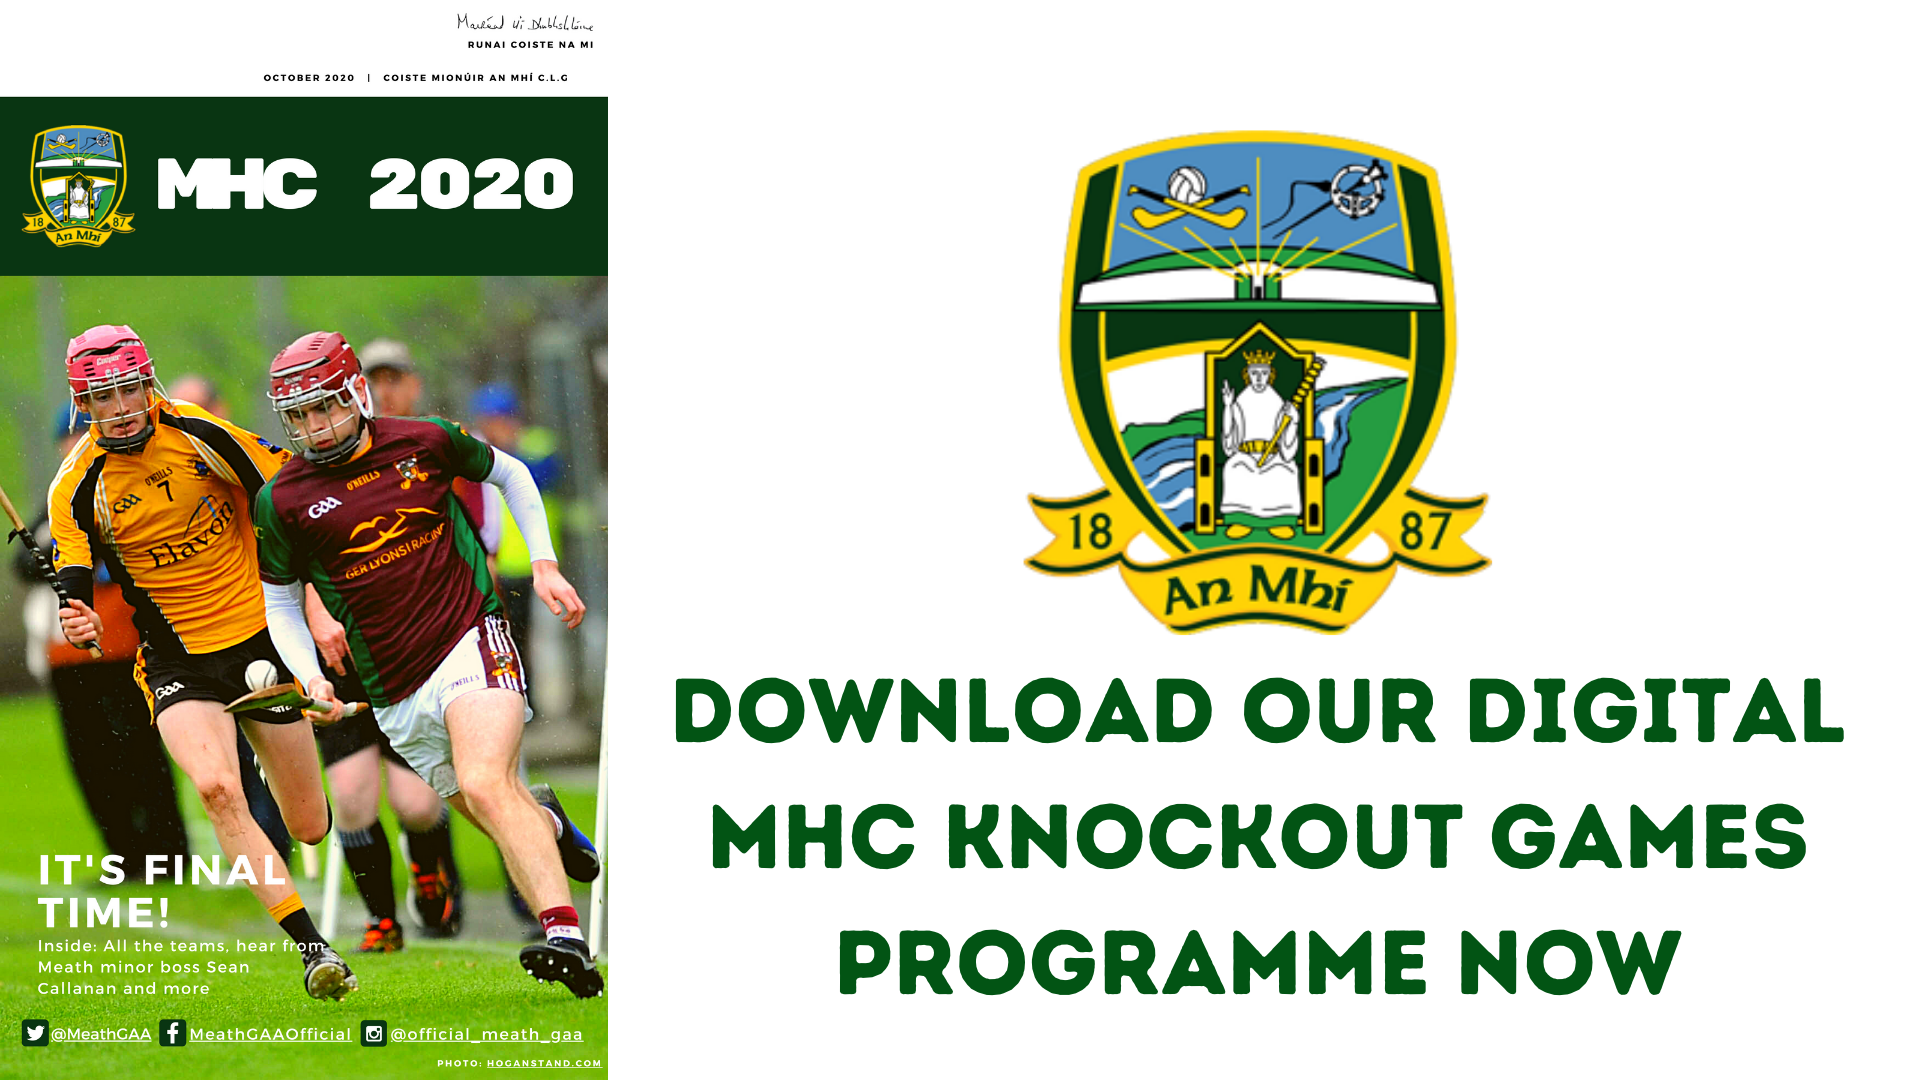 Get your MHC Knockout Games digital programme now